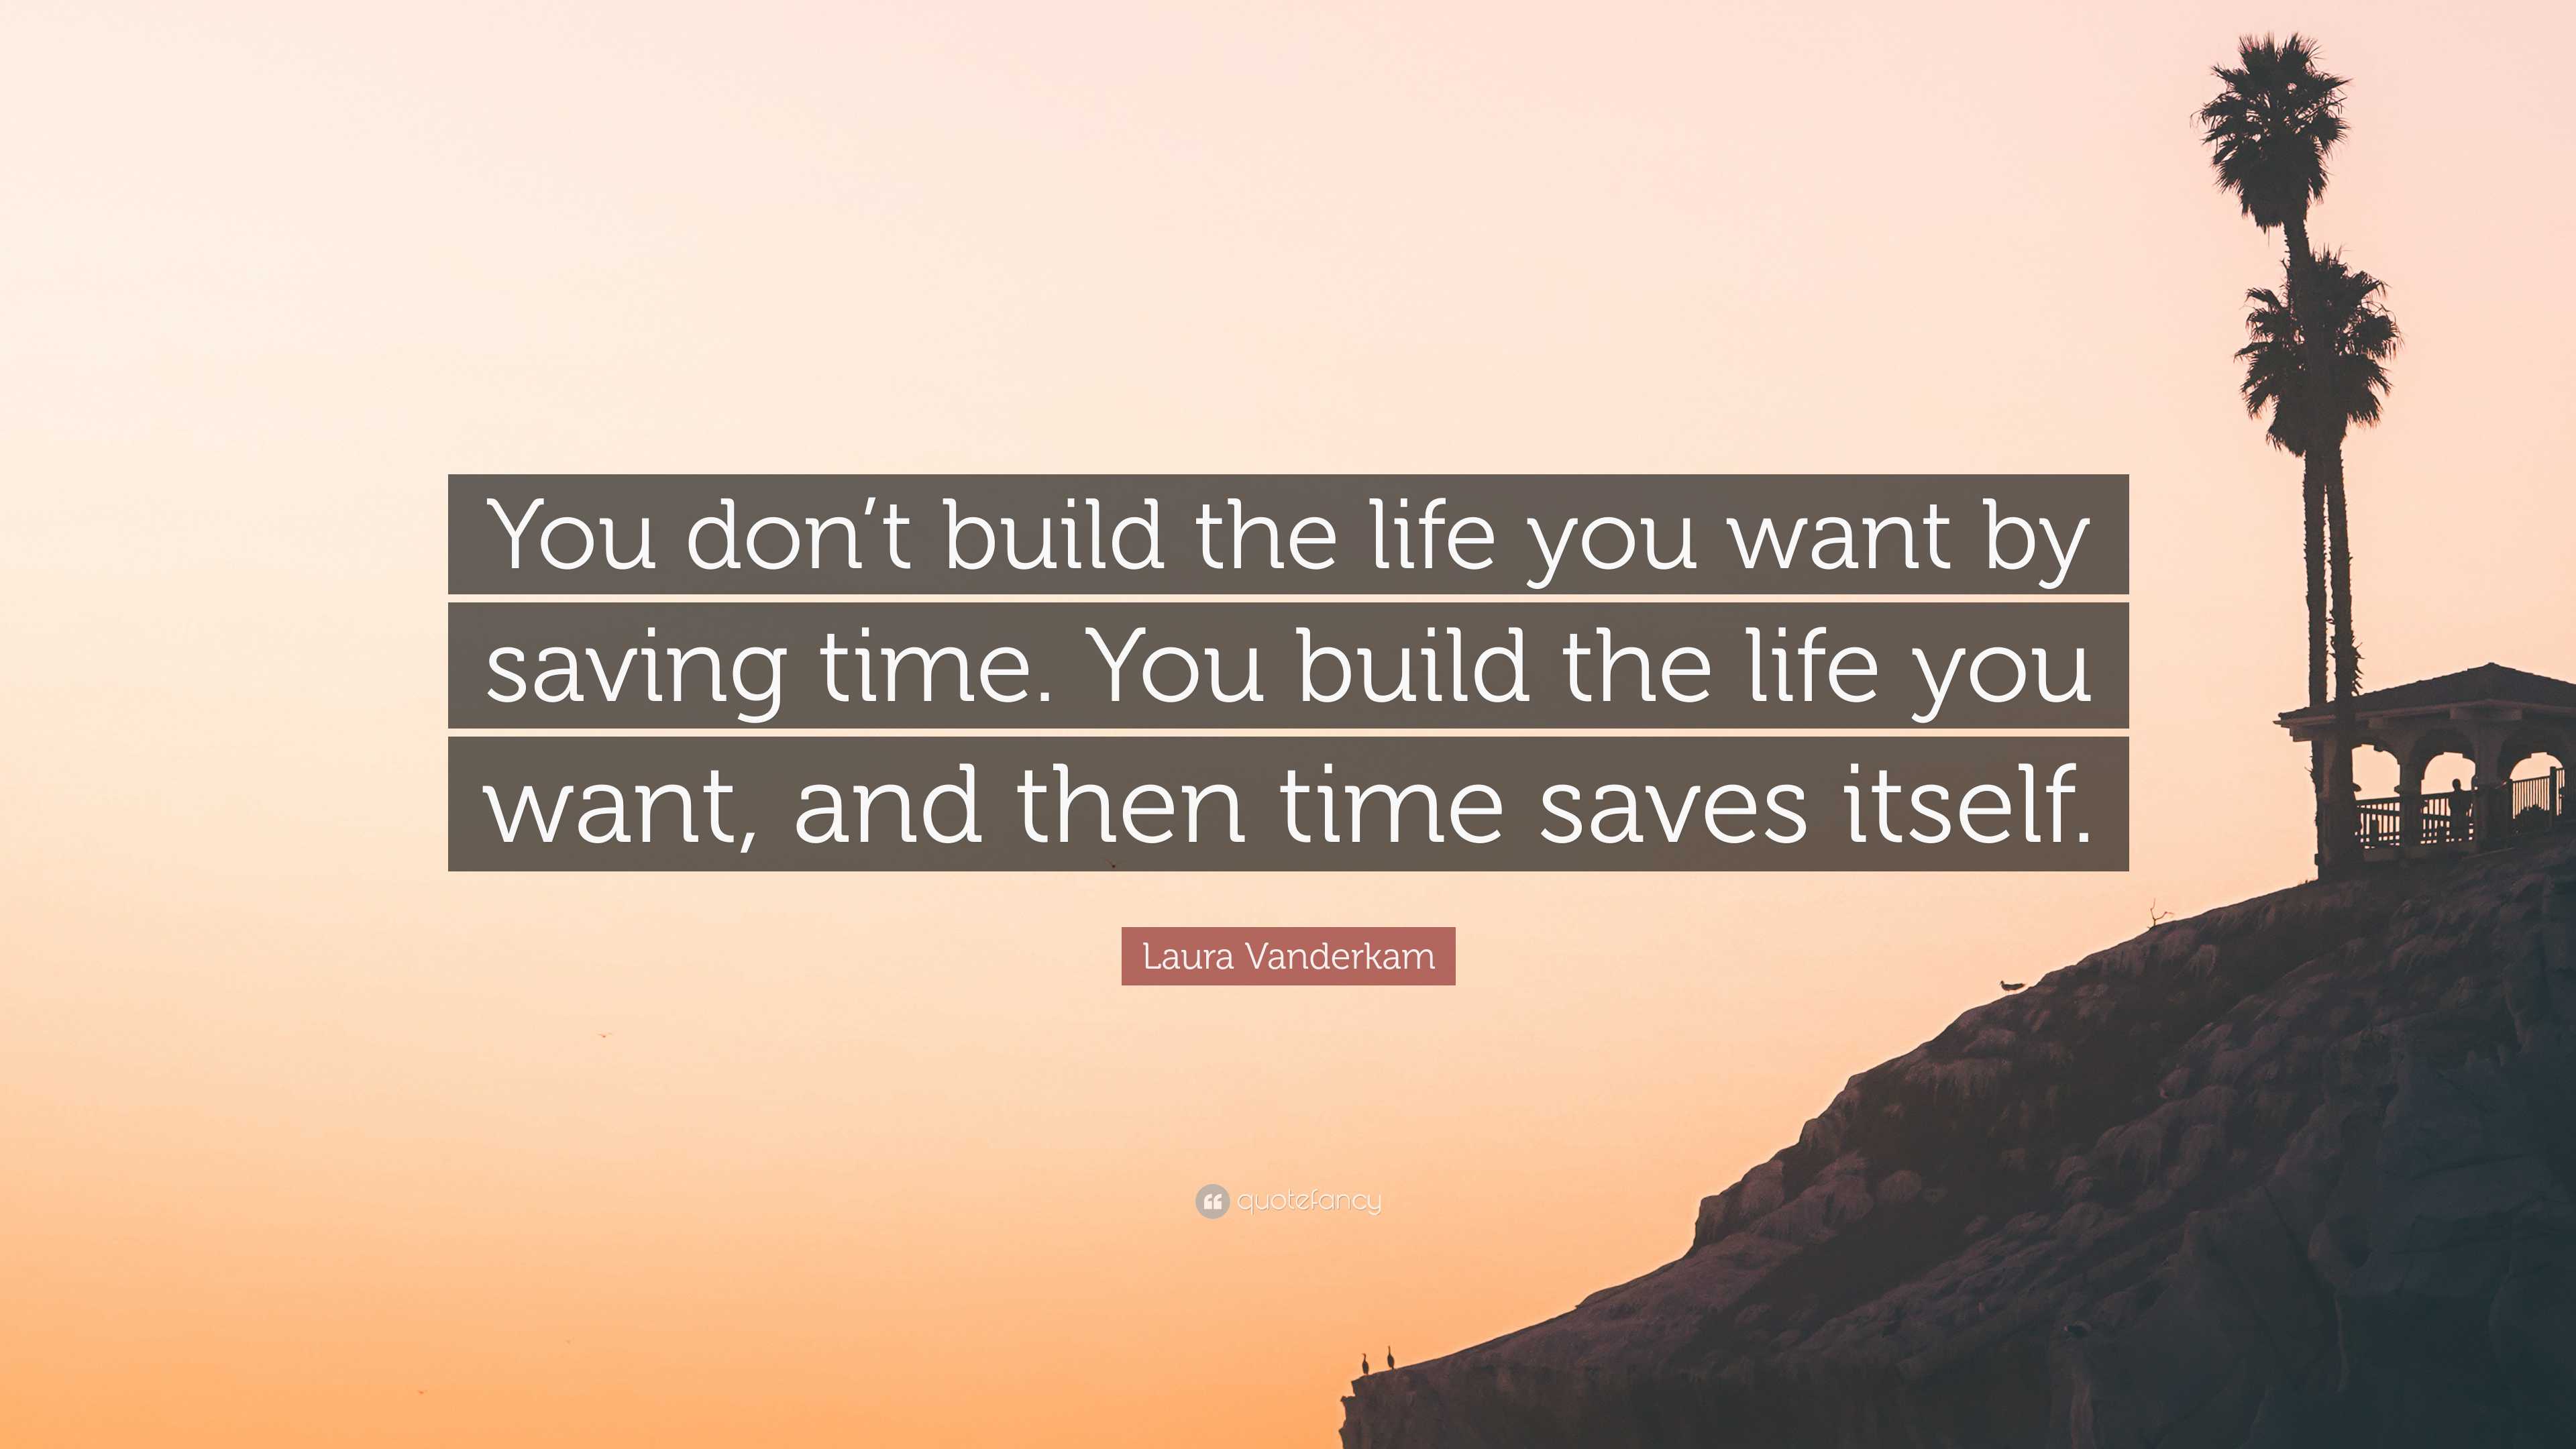 Laura Vanderkam Quote: “You don't build the life you want by saving time.  You build the life you want, and then time saves itself. Recognizing t”